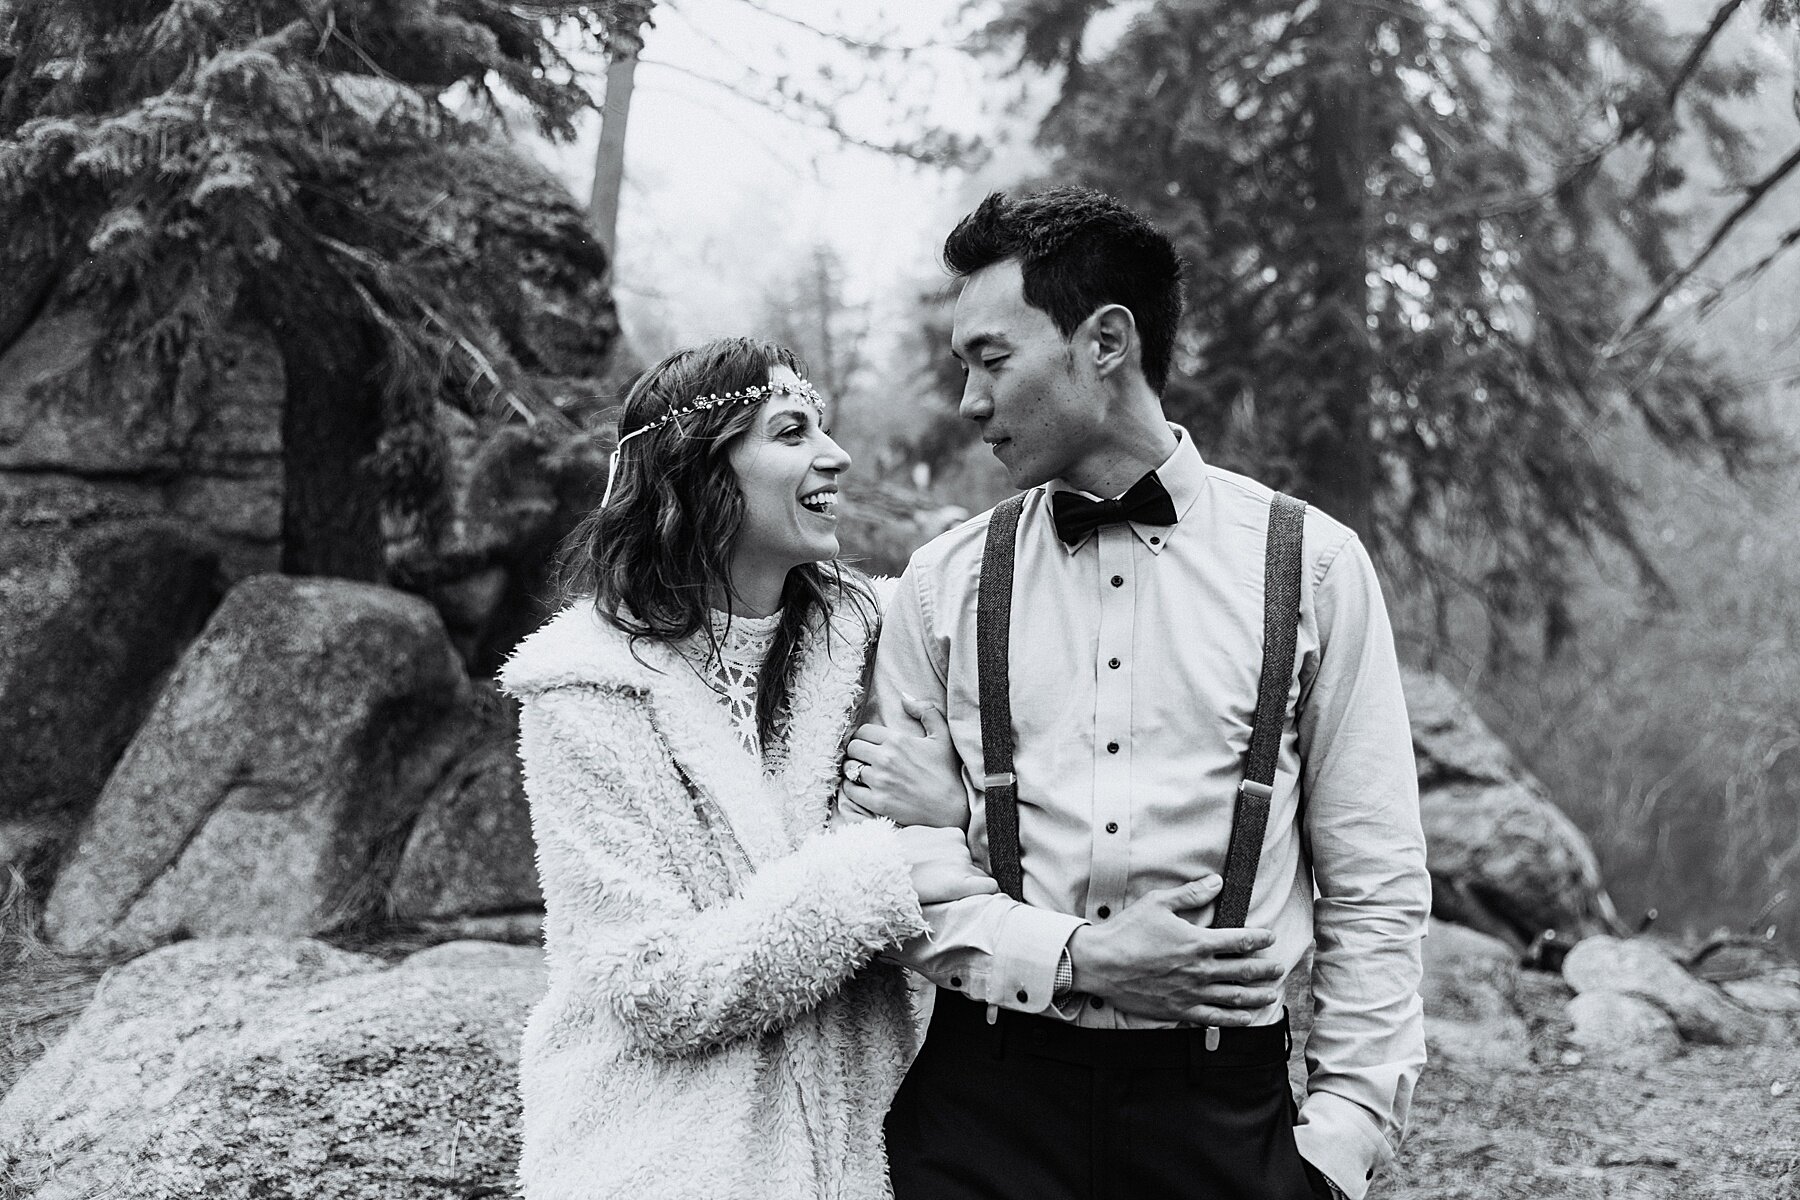 California Forest Elopement | Vow of the Wild